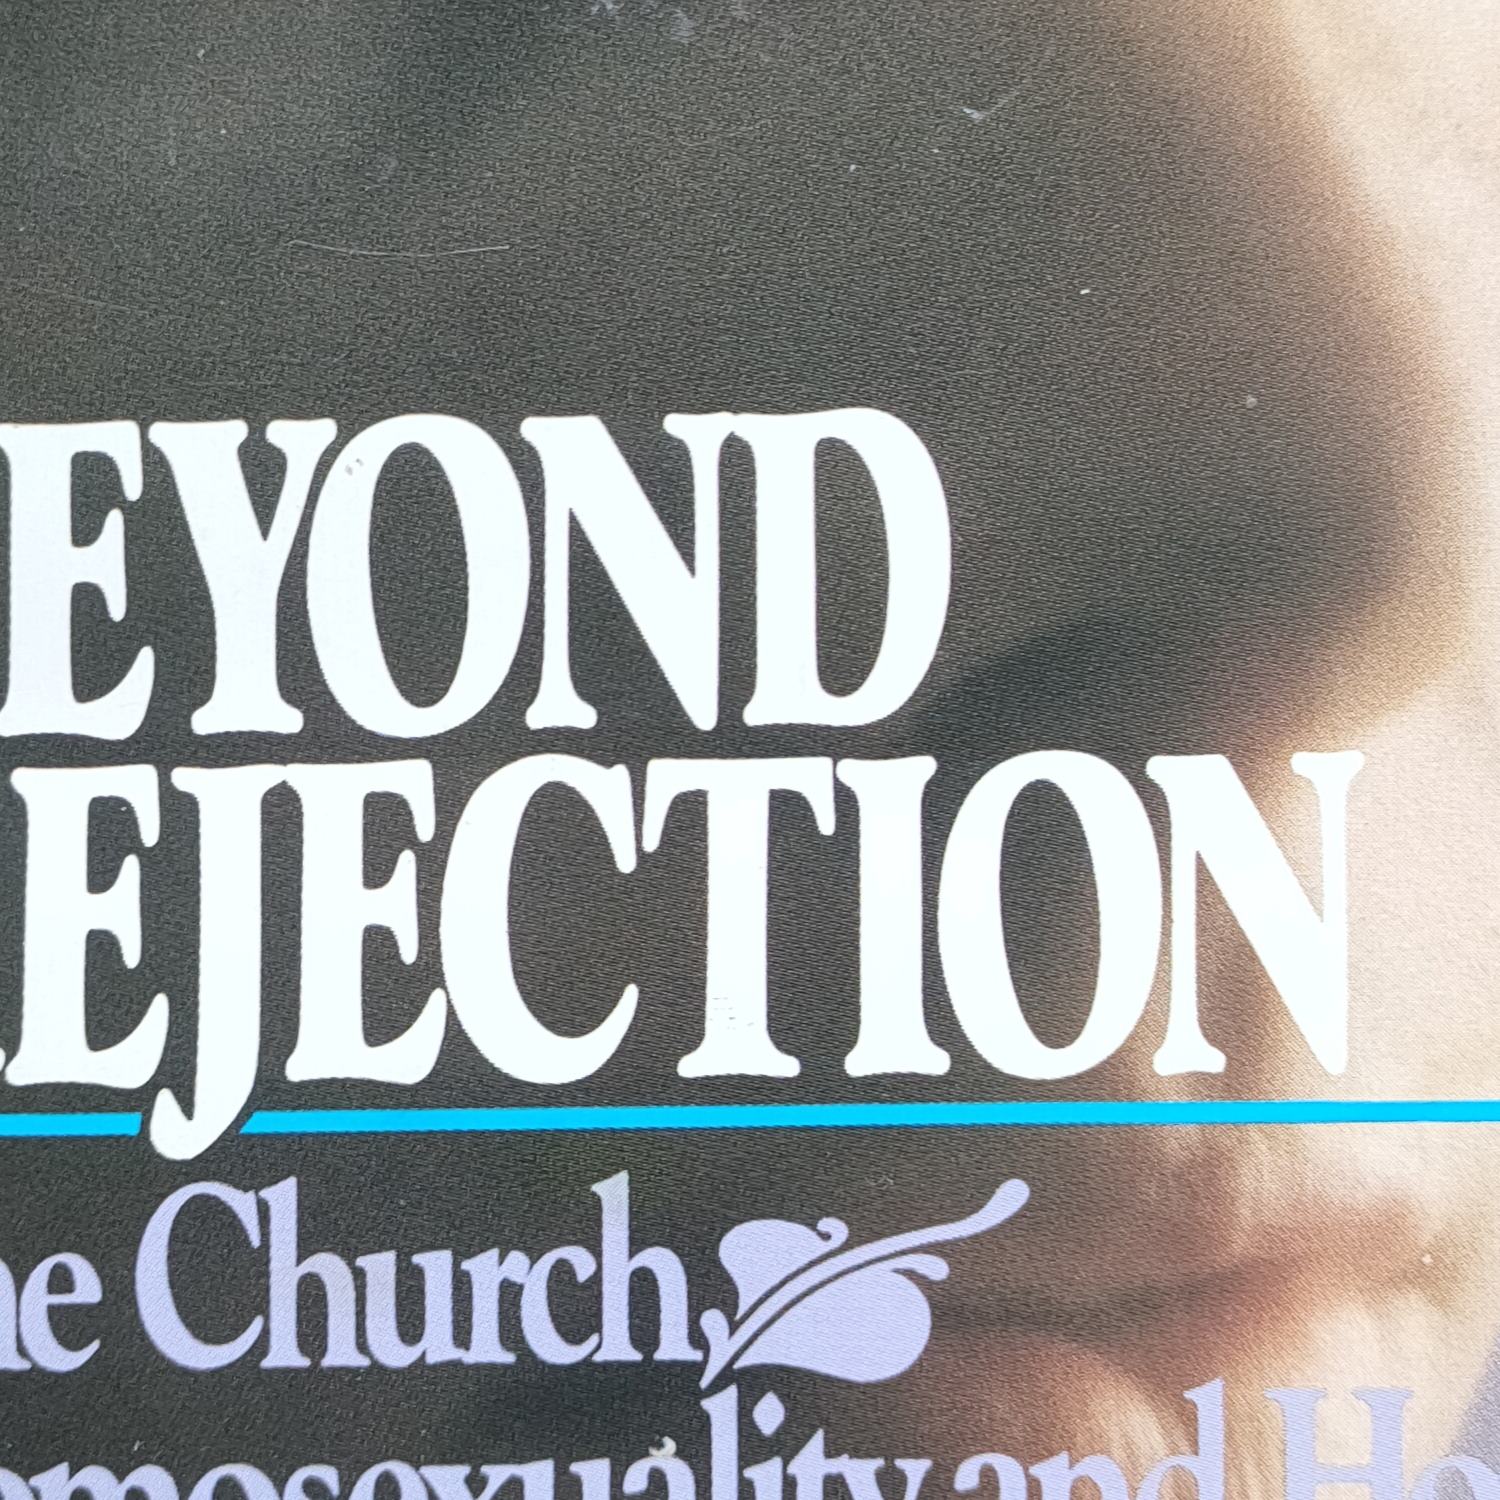 Image for Beyond Rejection: The Church, Homosexuality and Hope